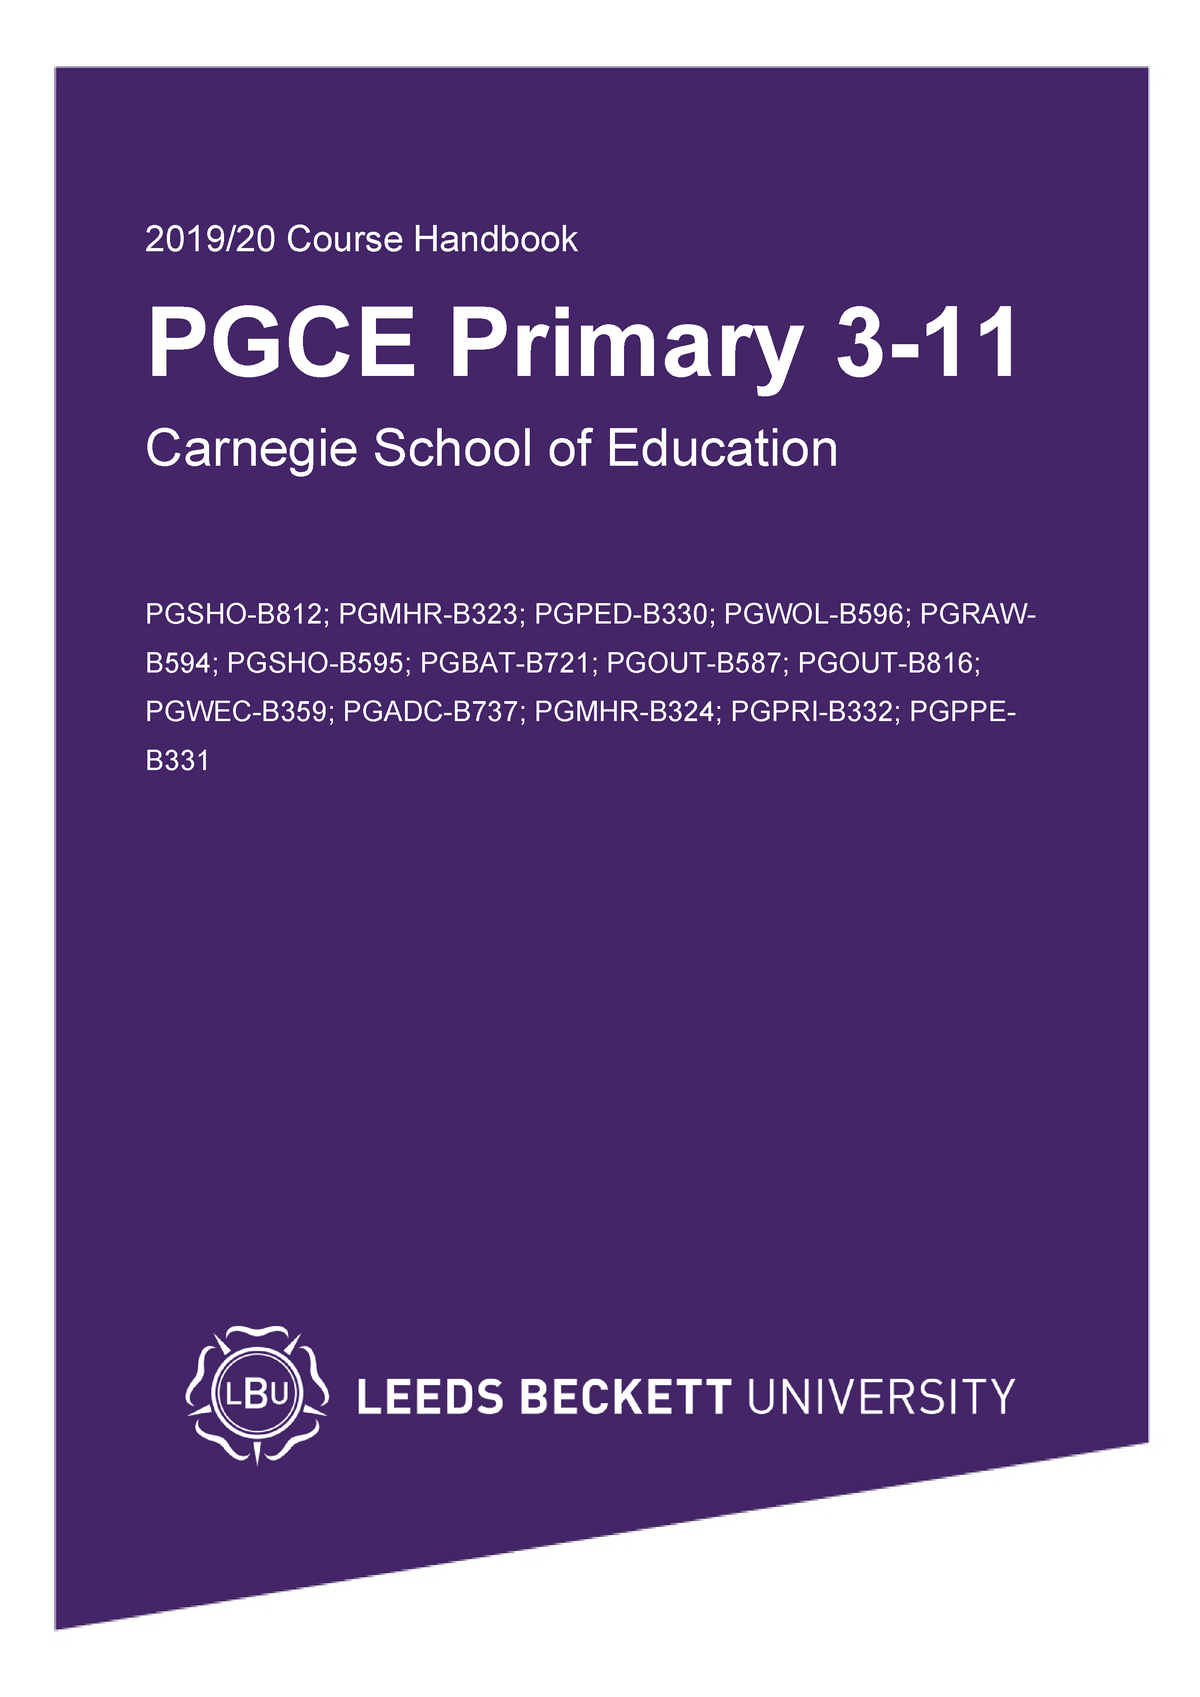 pgce primary assignment examples